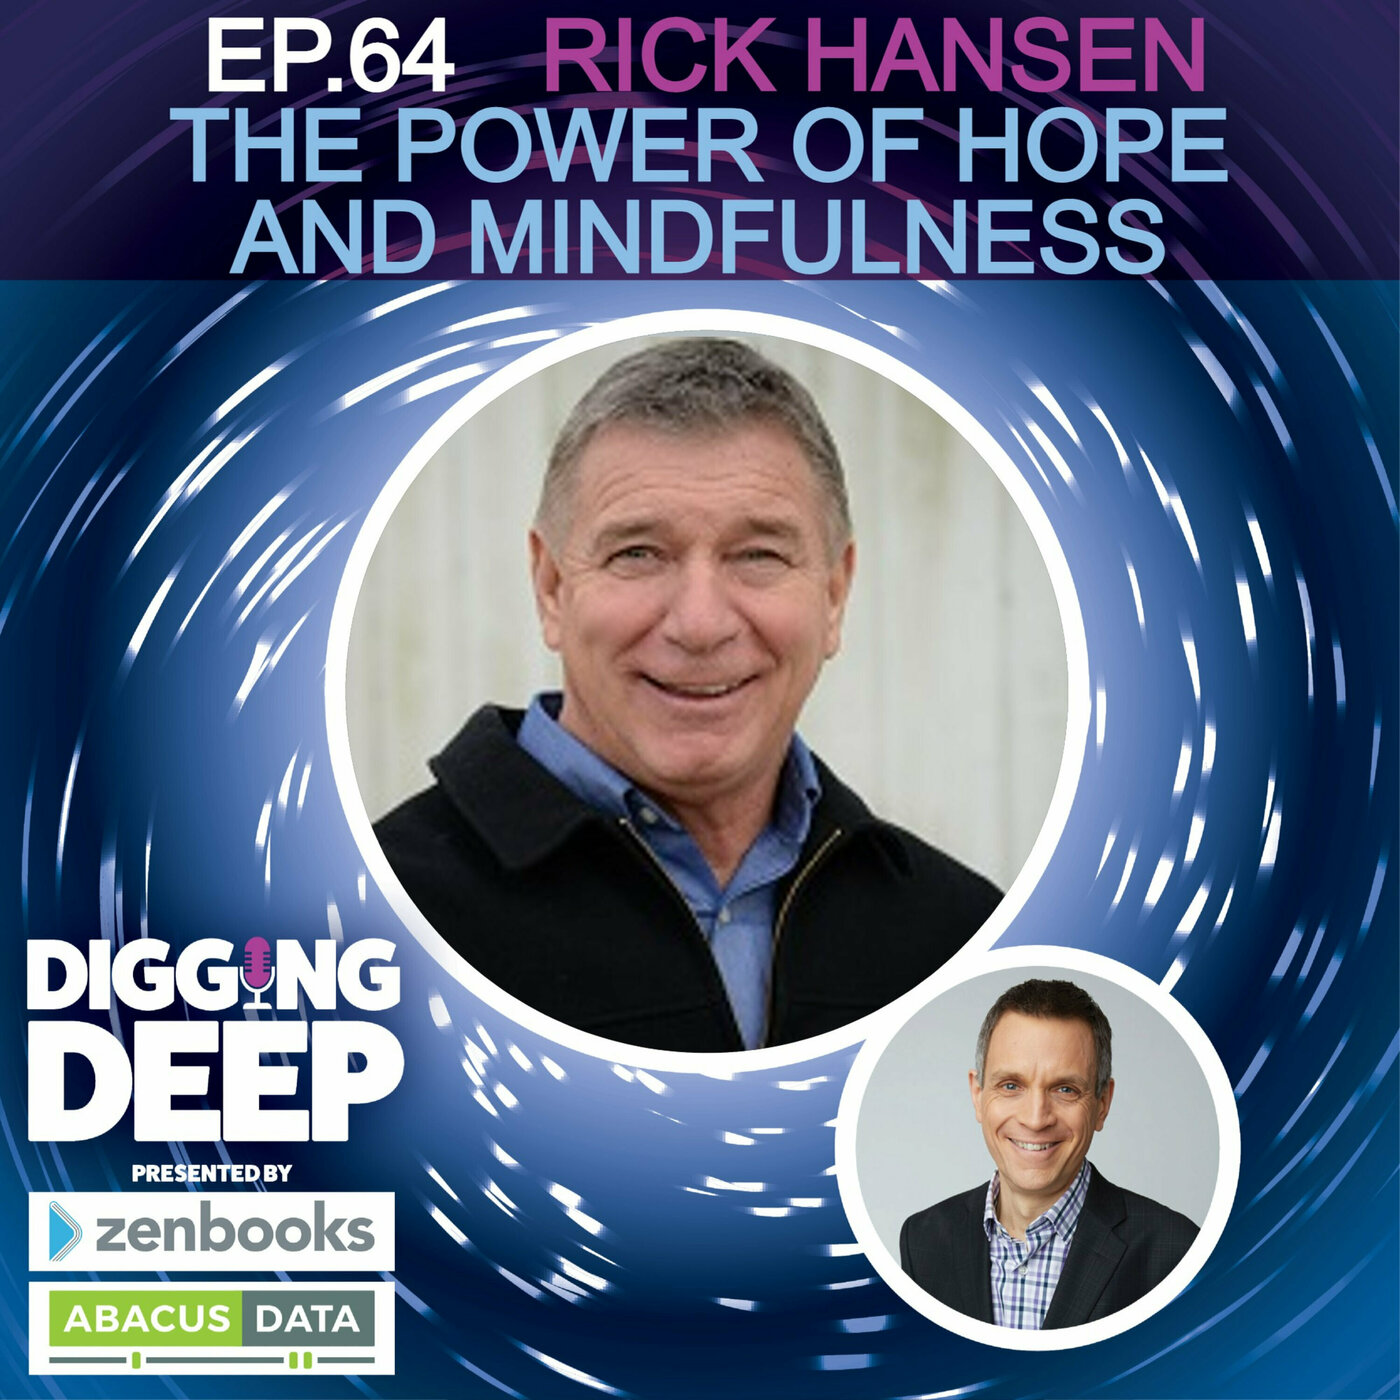 Rick Hansen: The Power of Hope and Mindfulness